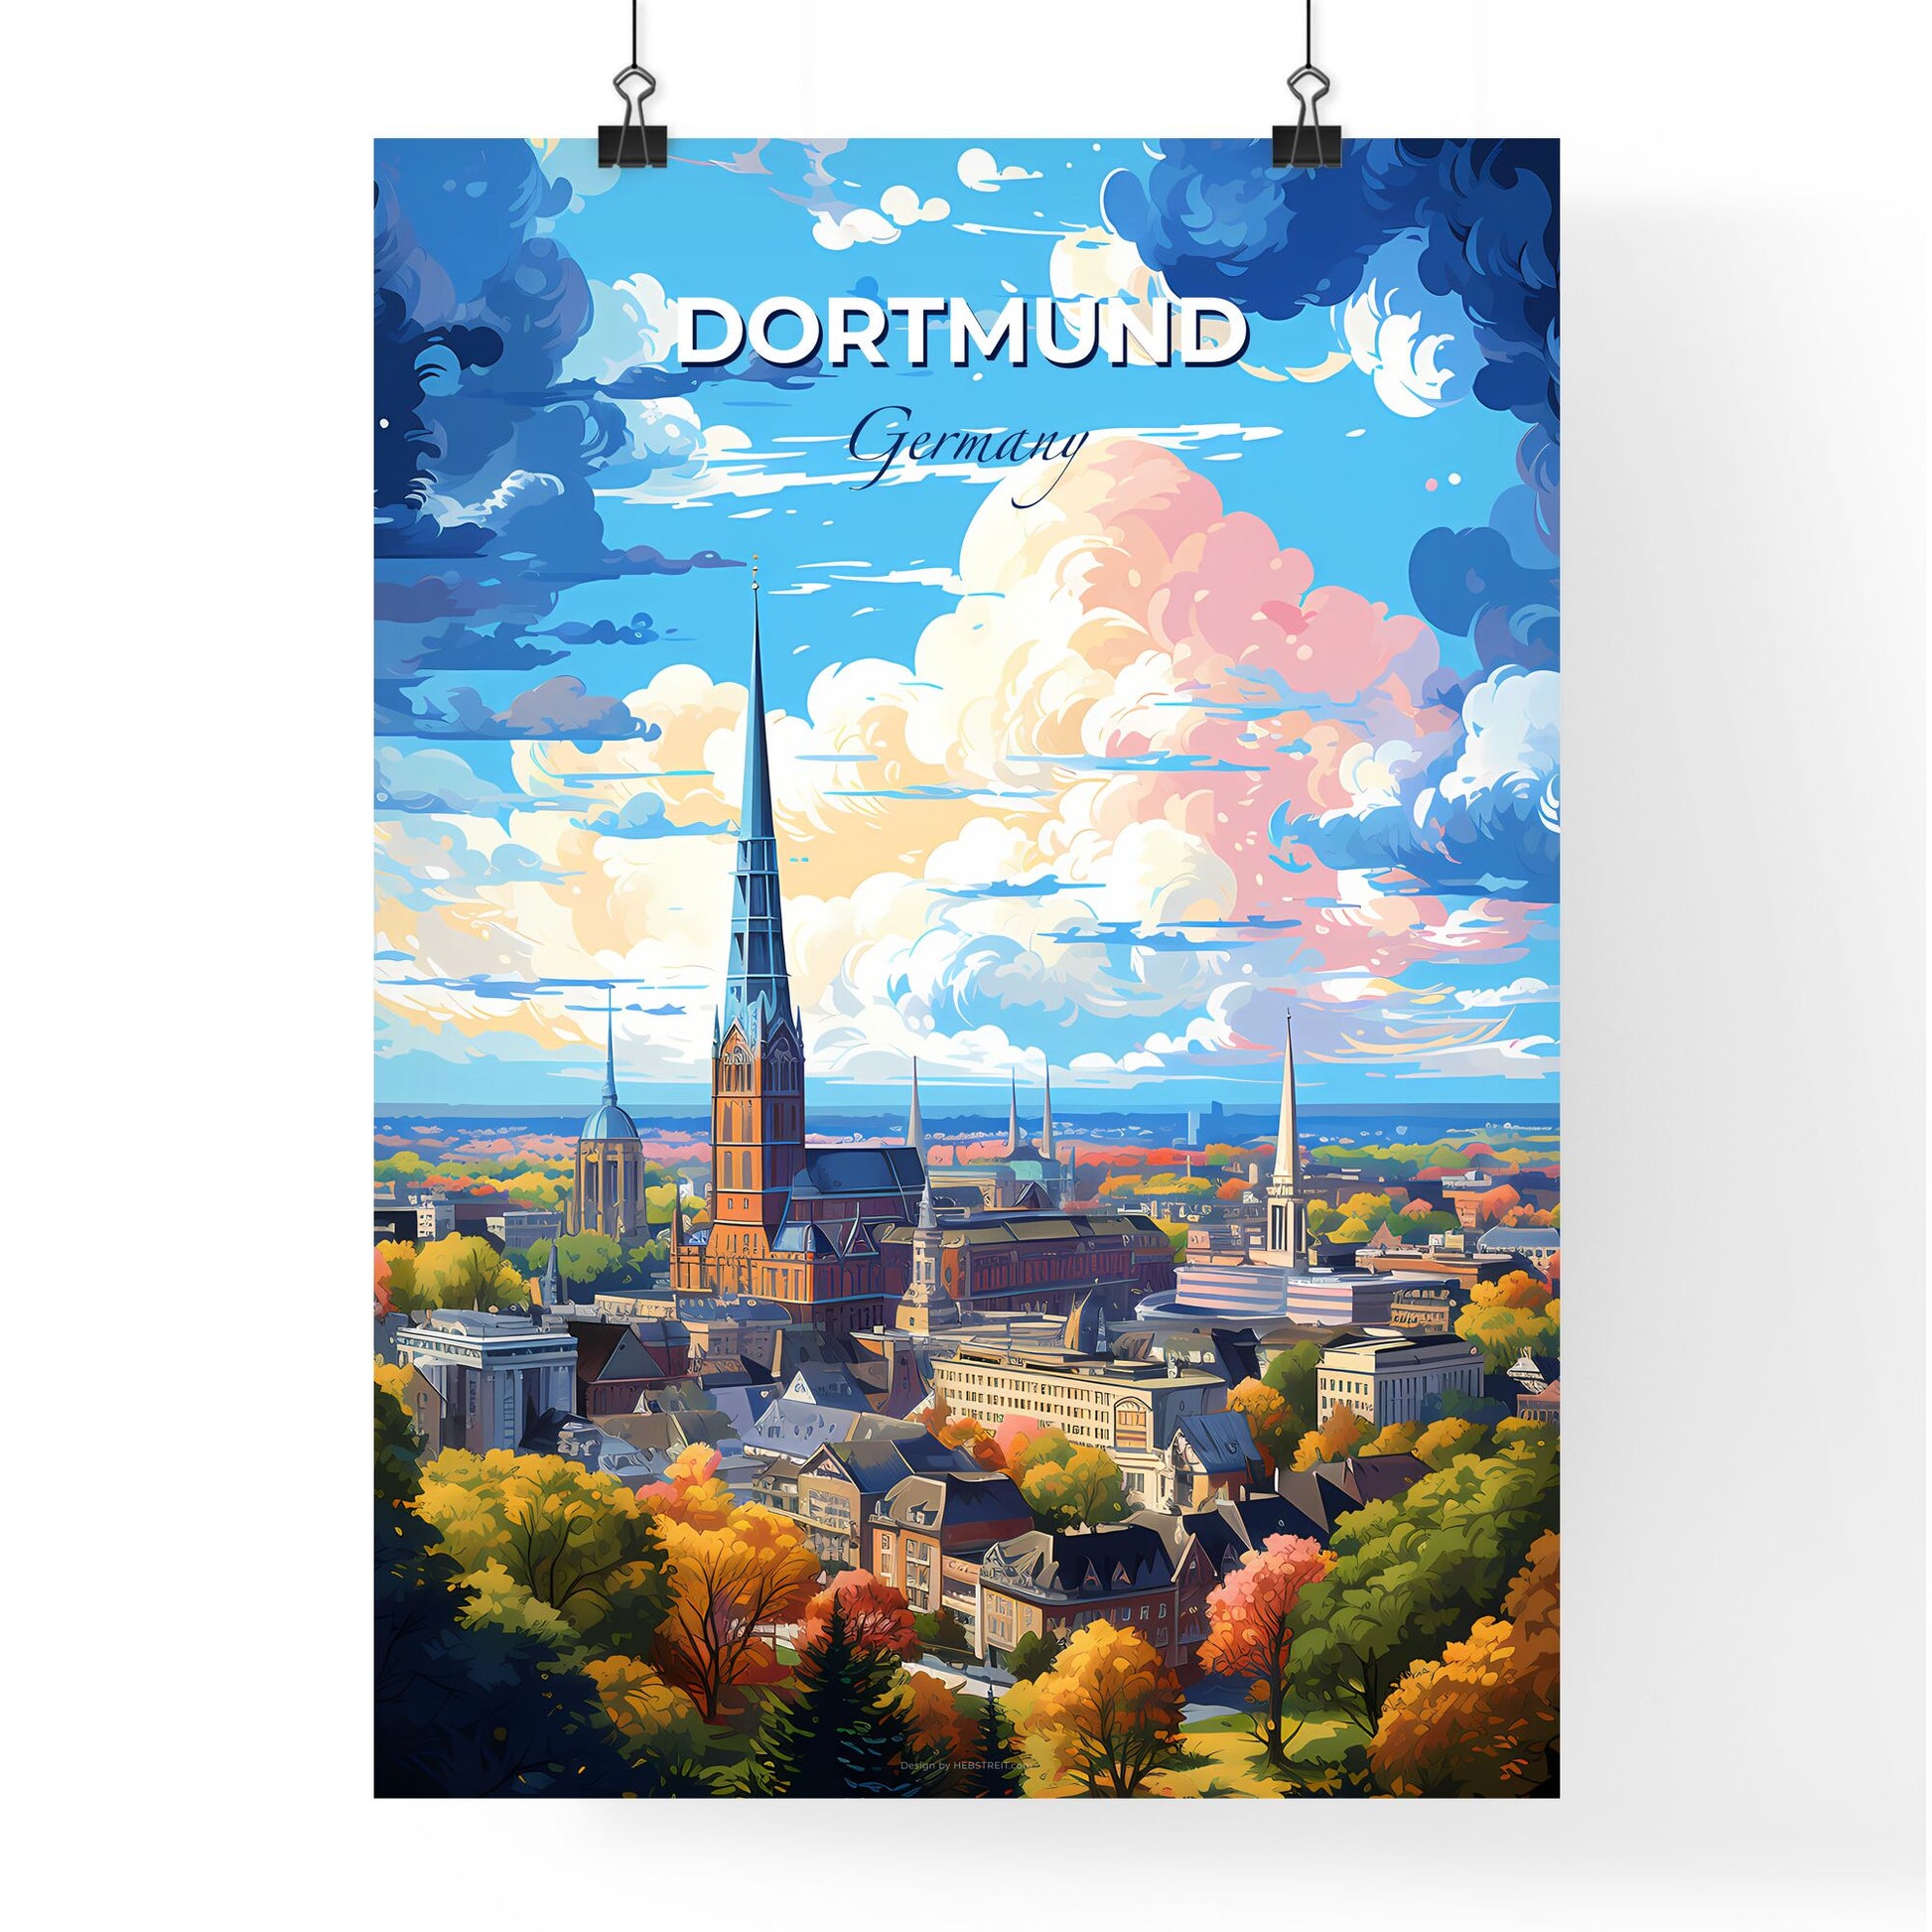 Dortmund Germany Skyline - A City With A Tall Spire And Trees - Customizable Travel Gift Default Title